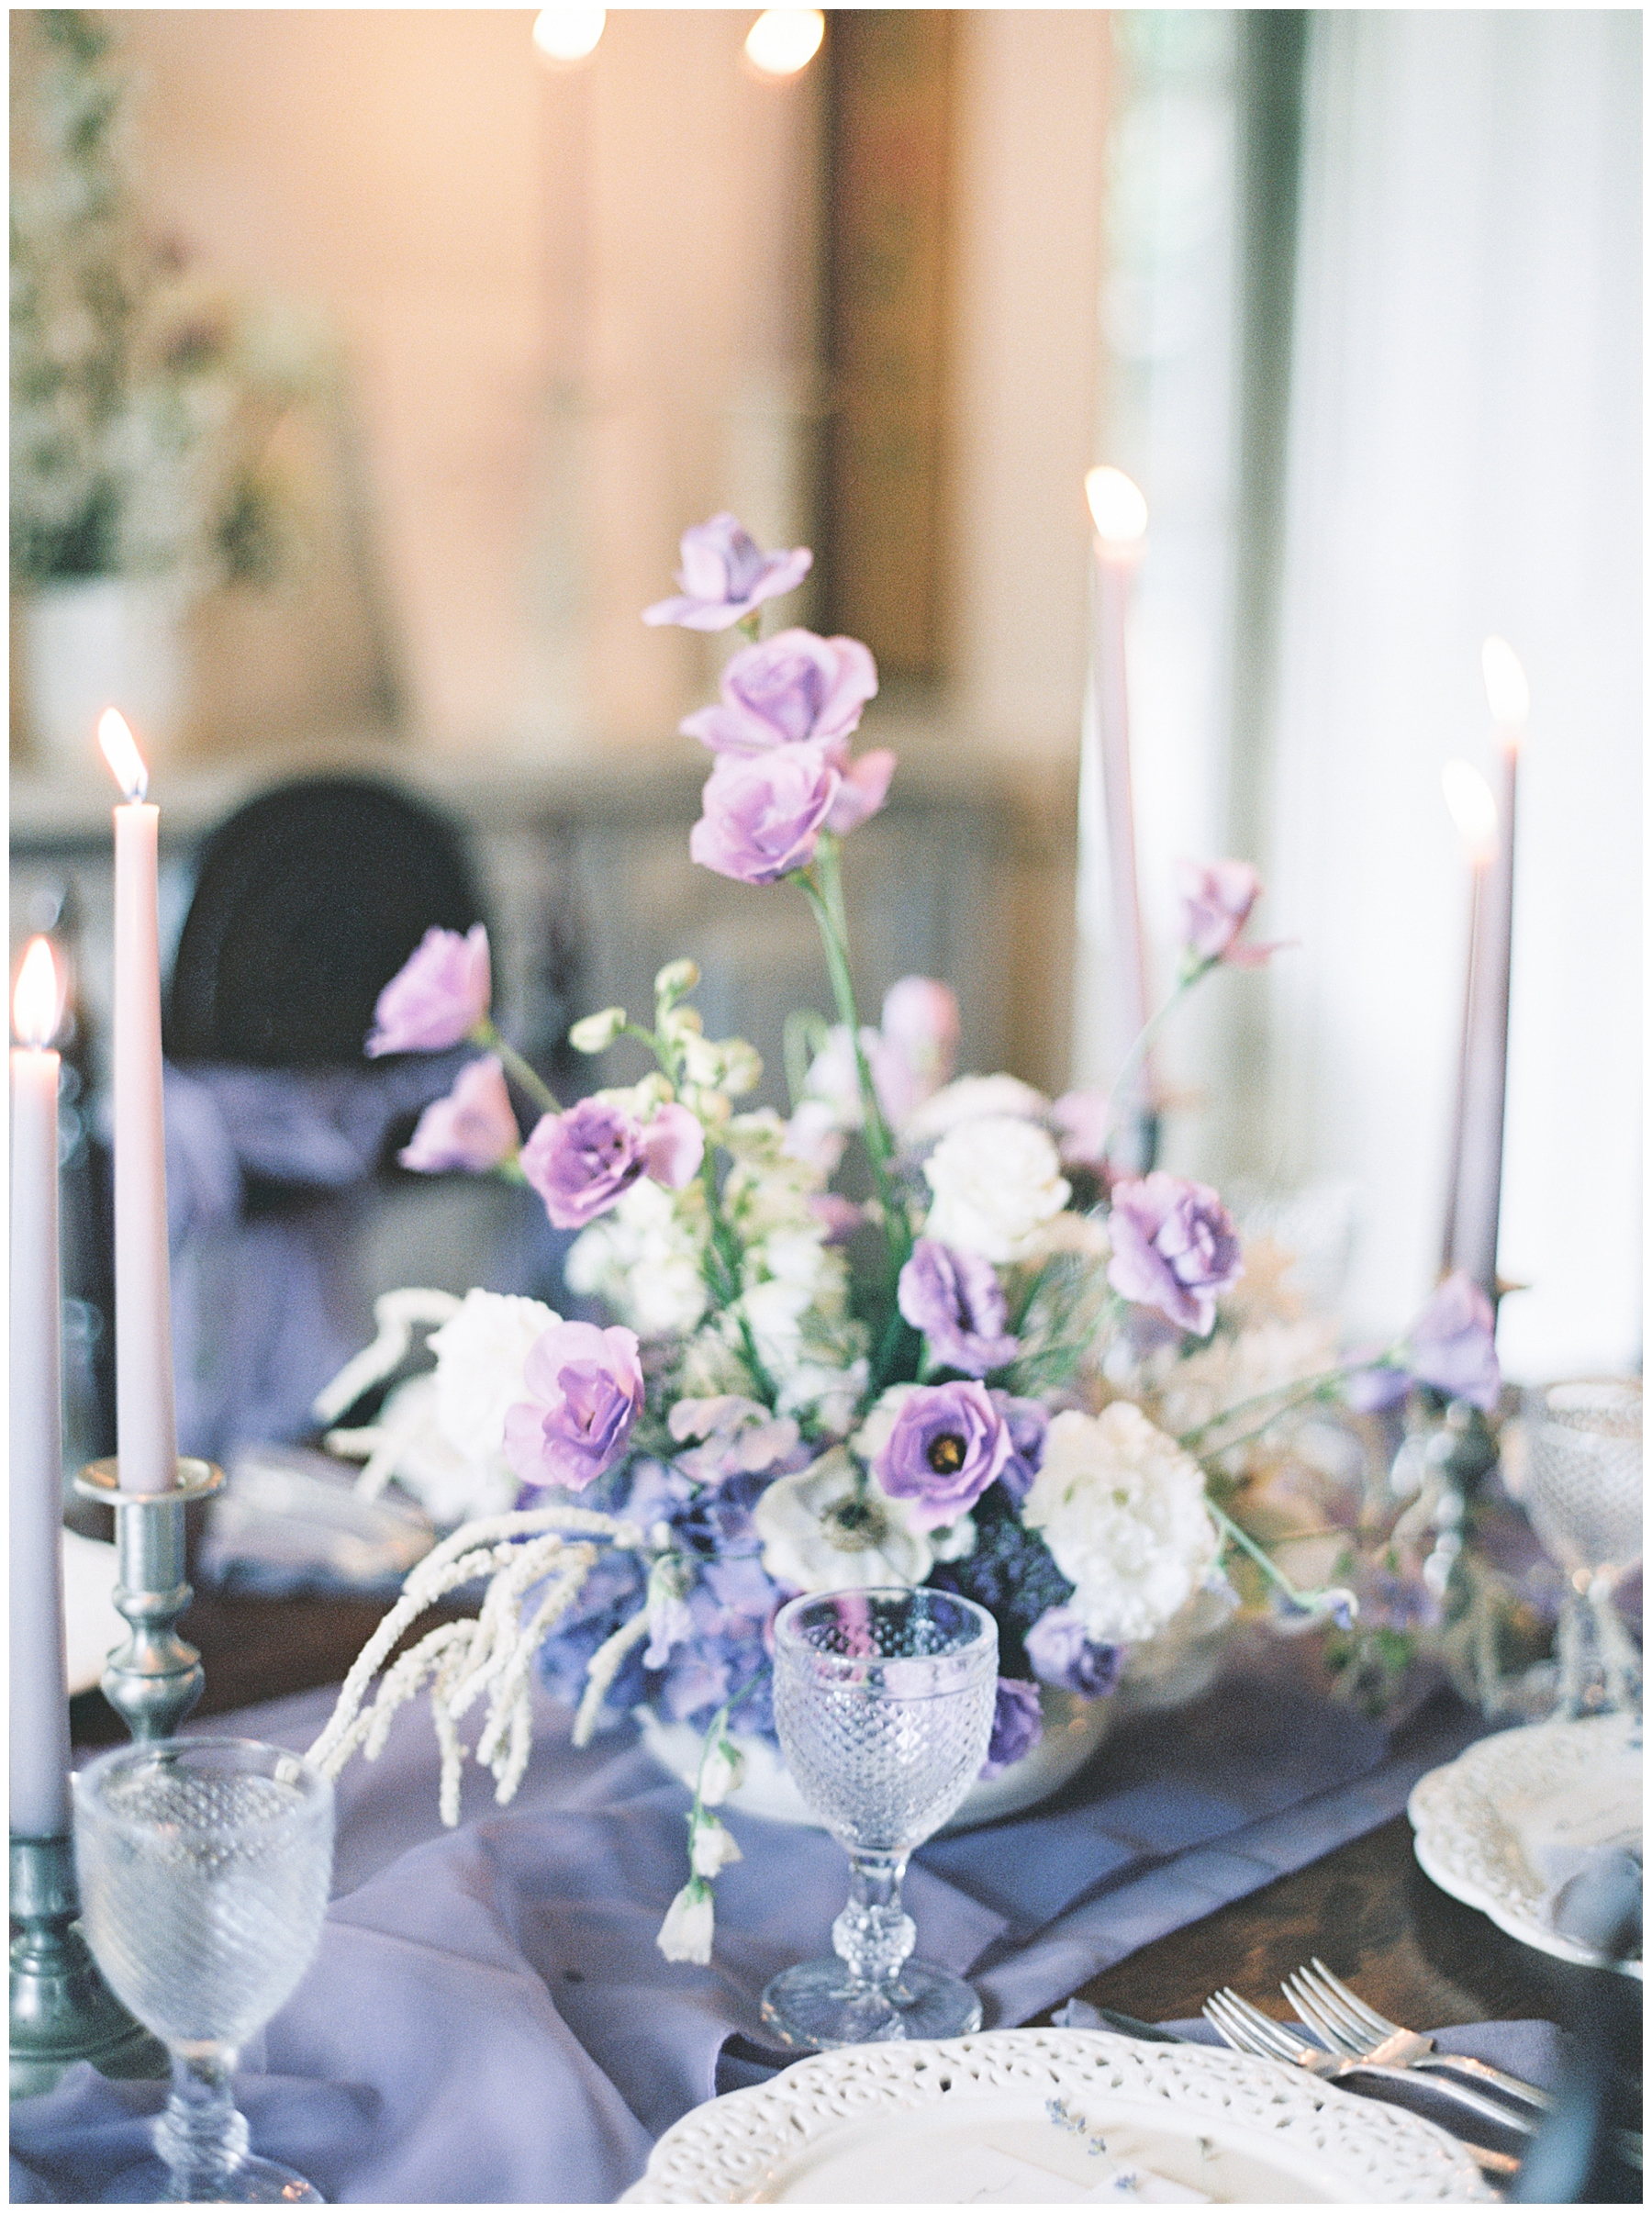 flower and candlestick centerpieces at intimate wedding celebration